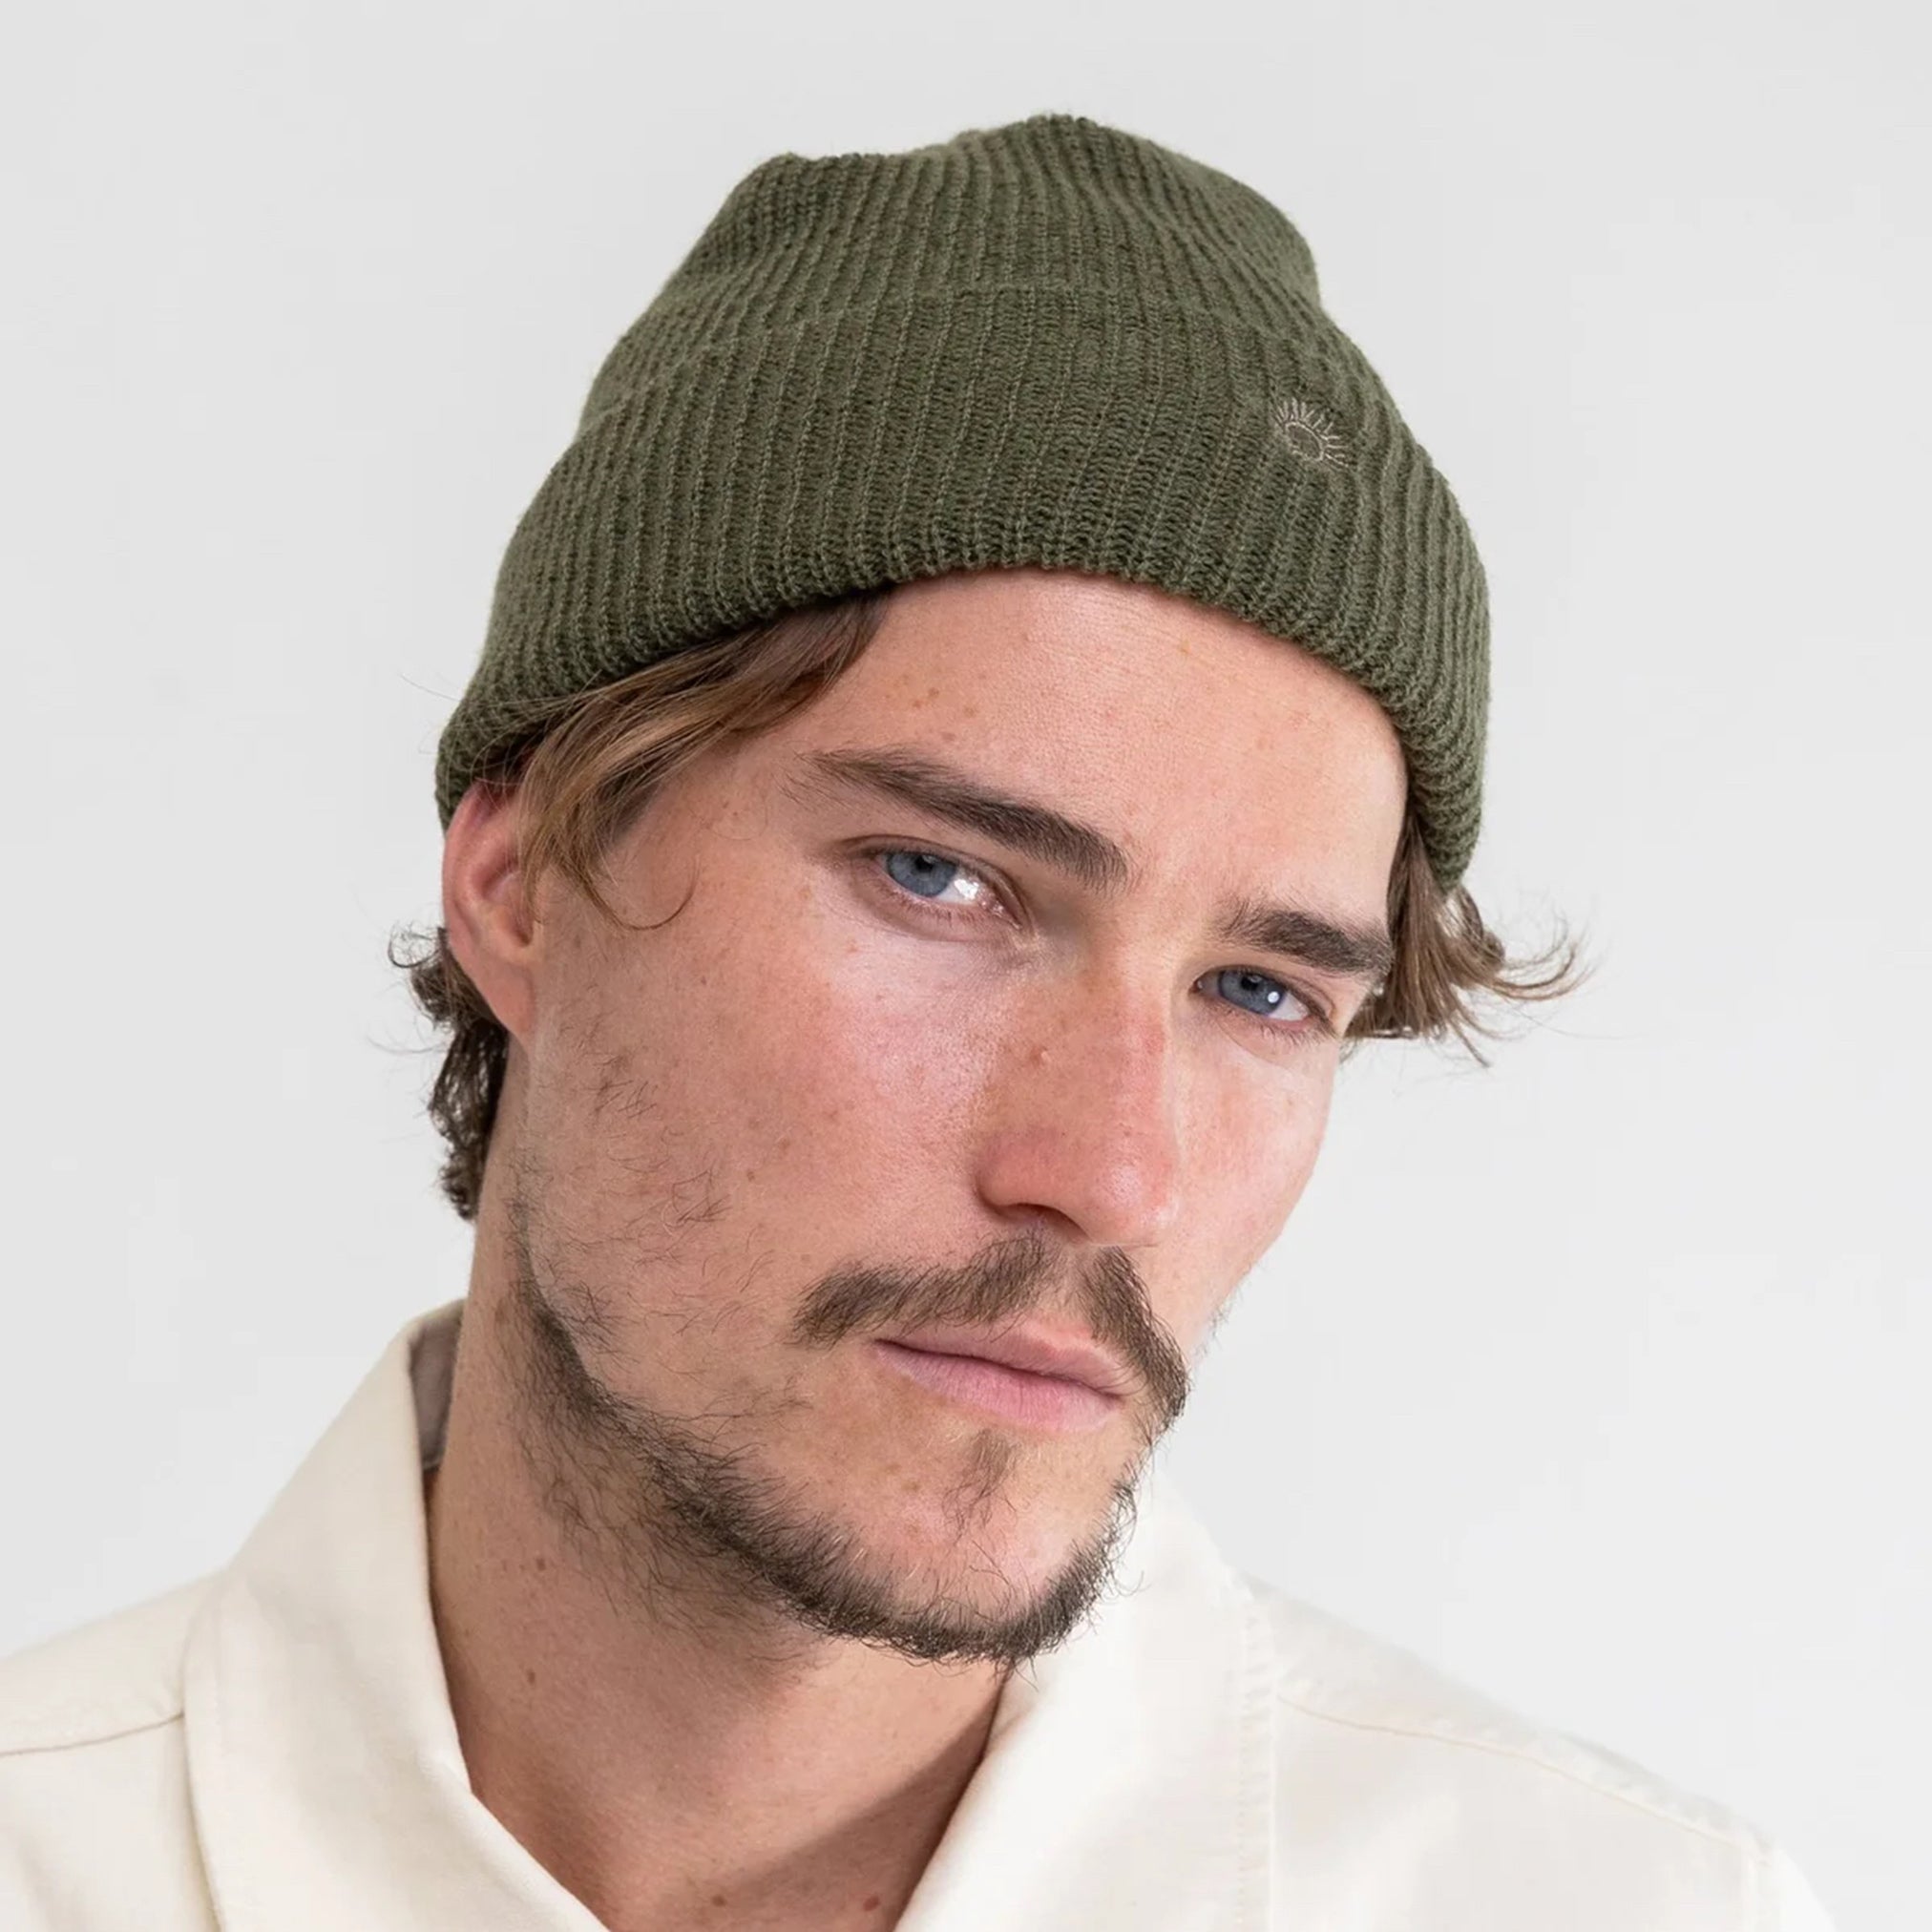 Classic Watch Beanie in Olive